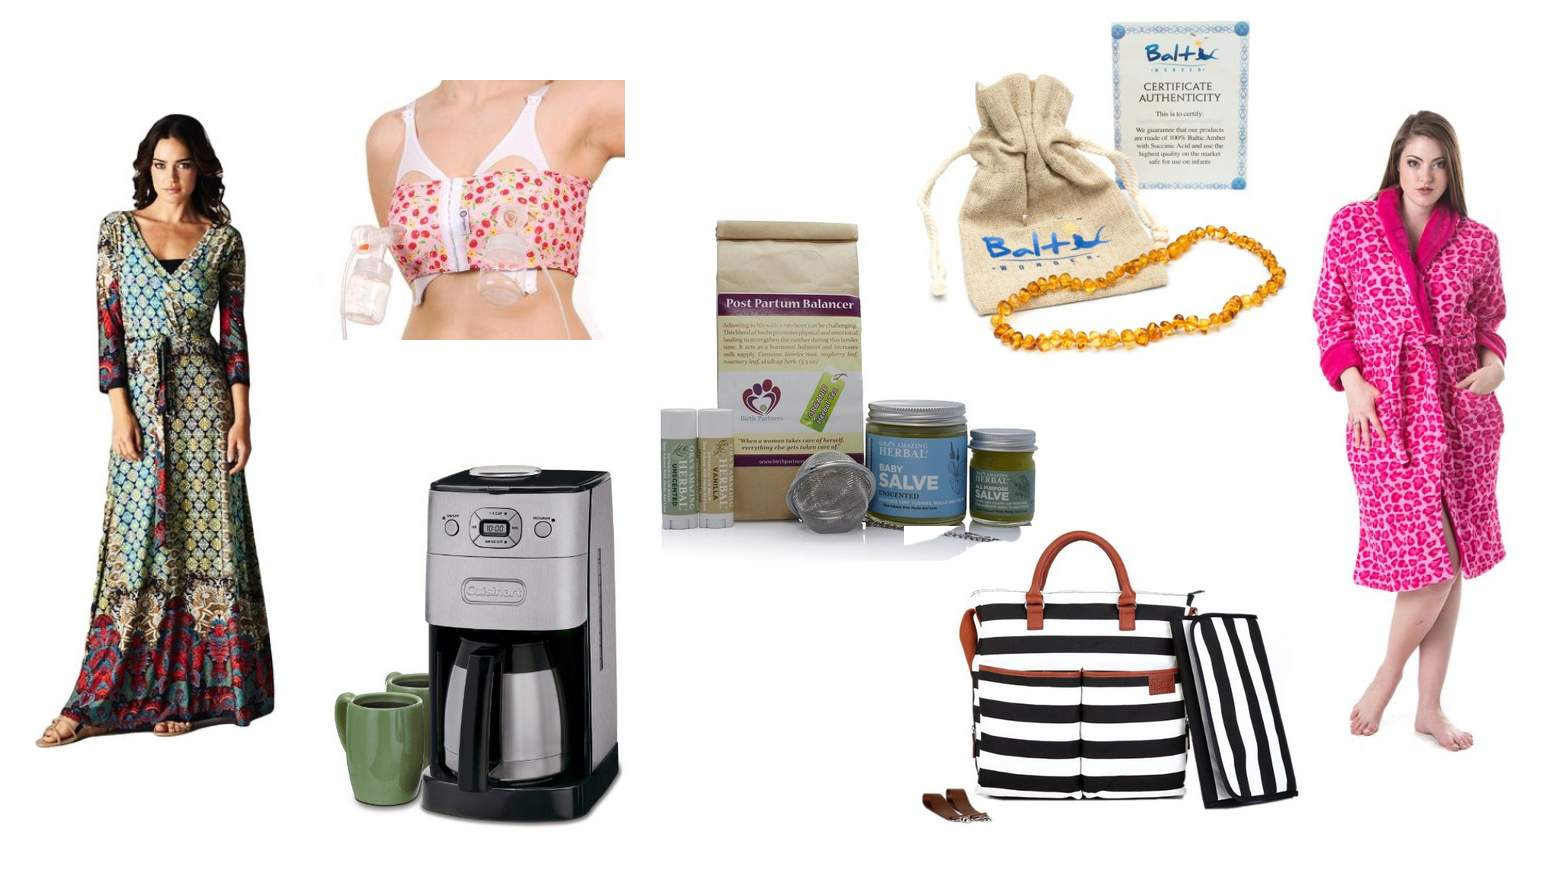 Best Mothers Day Gifts For New Moms
 Top 10 Best Gifts for New Moms